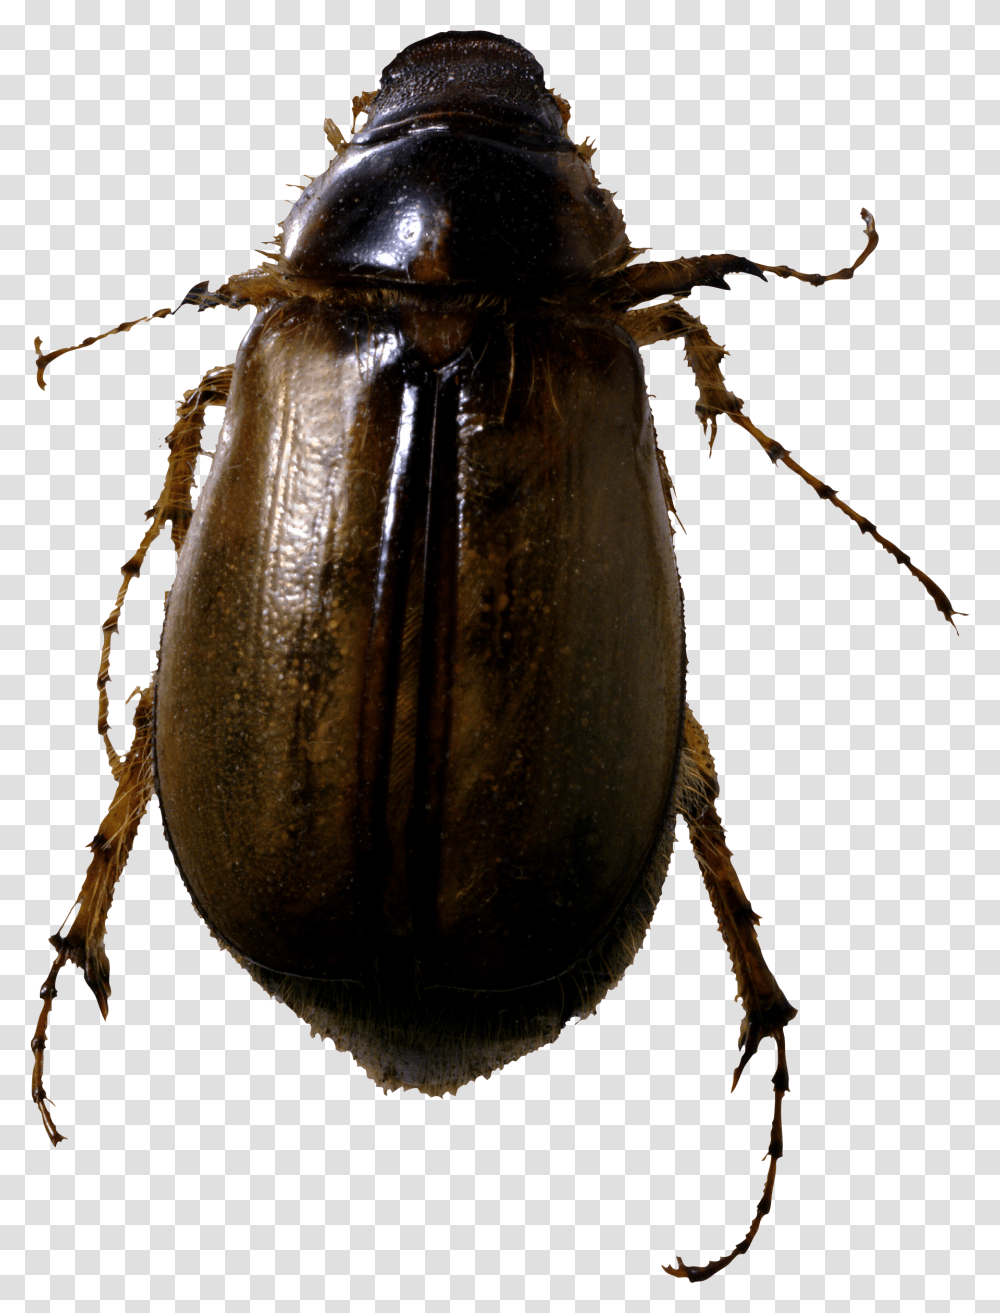 Bugs Image Without Background Bug, Insect, Invertebrate, Animal, Dung Beetle Transparent Png